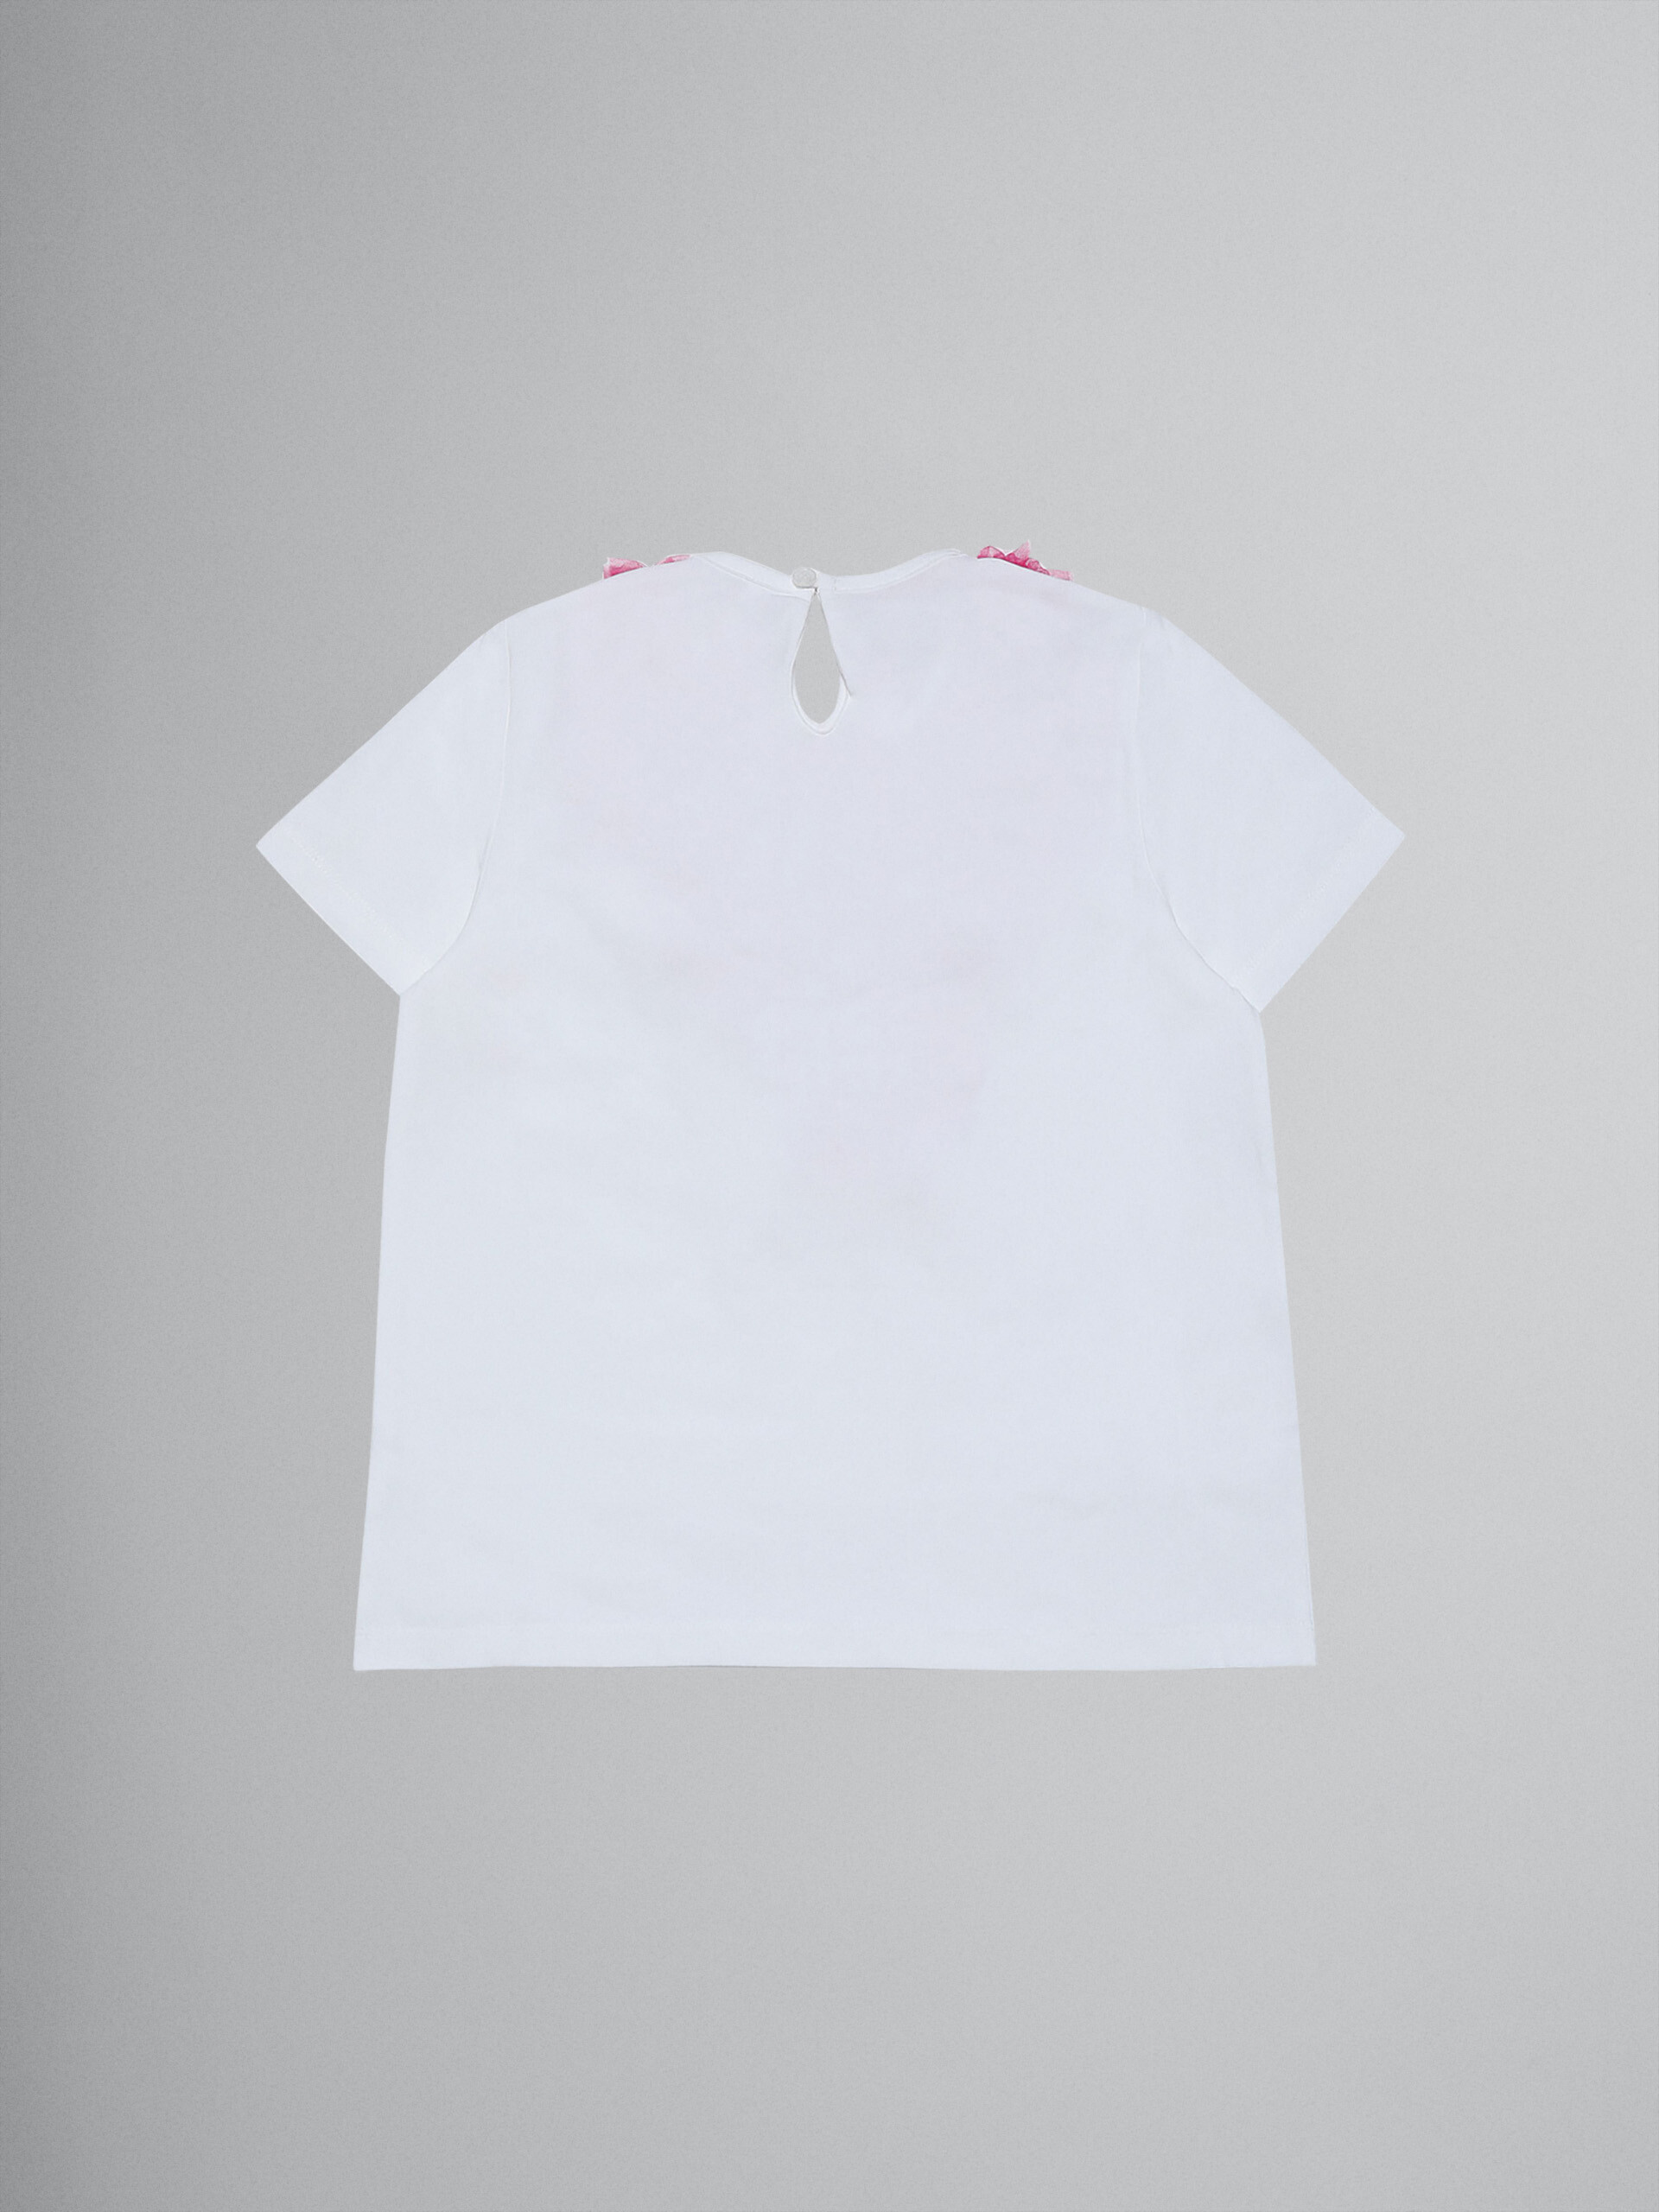 Stretch cotton jersey and tulle T-shirt - T-shirts - Image 2